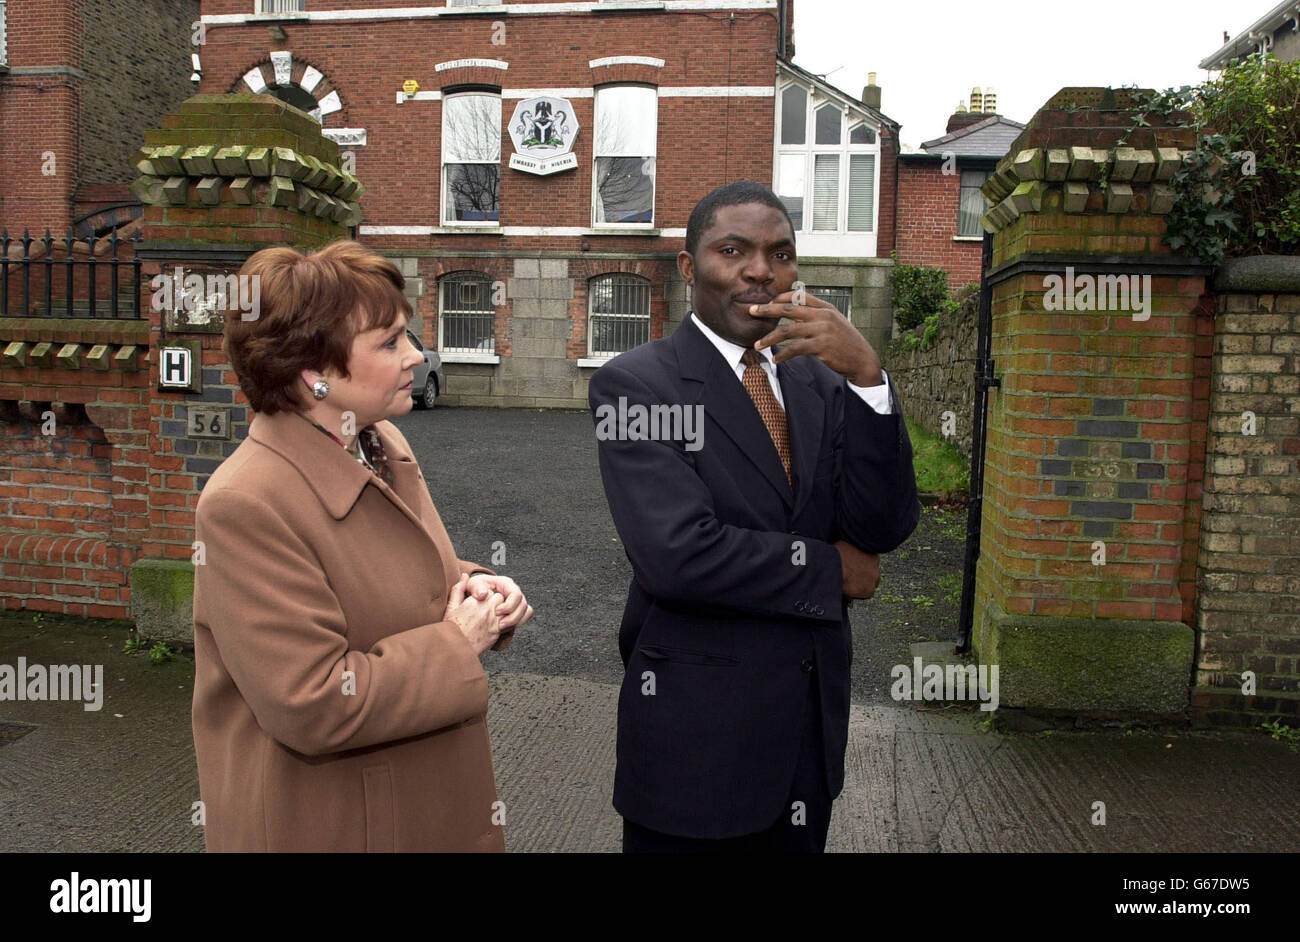 Former Eurovision Song Contest winner Dana (left) and a member of staff from the Nigerian Embassy outside the embassy building in Dublin, . Dana Rosemary Scallon, MEP for Connacht and Ulster, *..was appealing to the Nigerian Ambassador to help save a young mother who faces death by stoning. She handed in a letter appealing for help in the case of Mrs Amina Lawal Kurami, sentenced for having a child out of wedlock after her divorce. Stock Photo